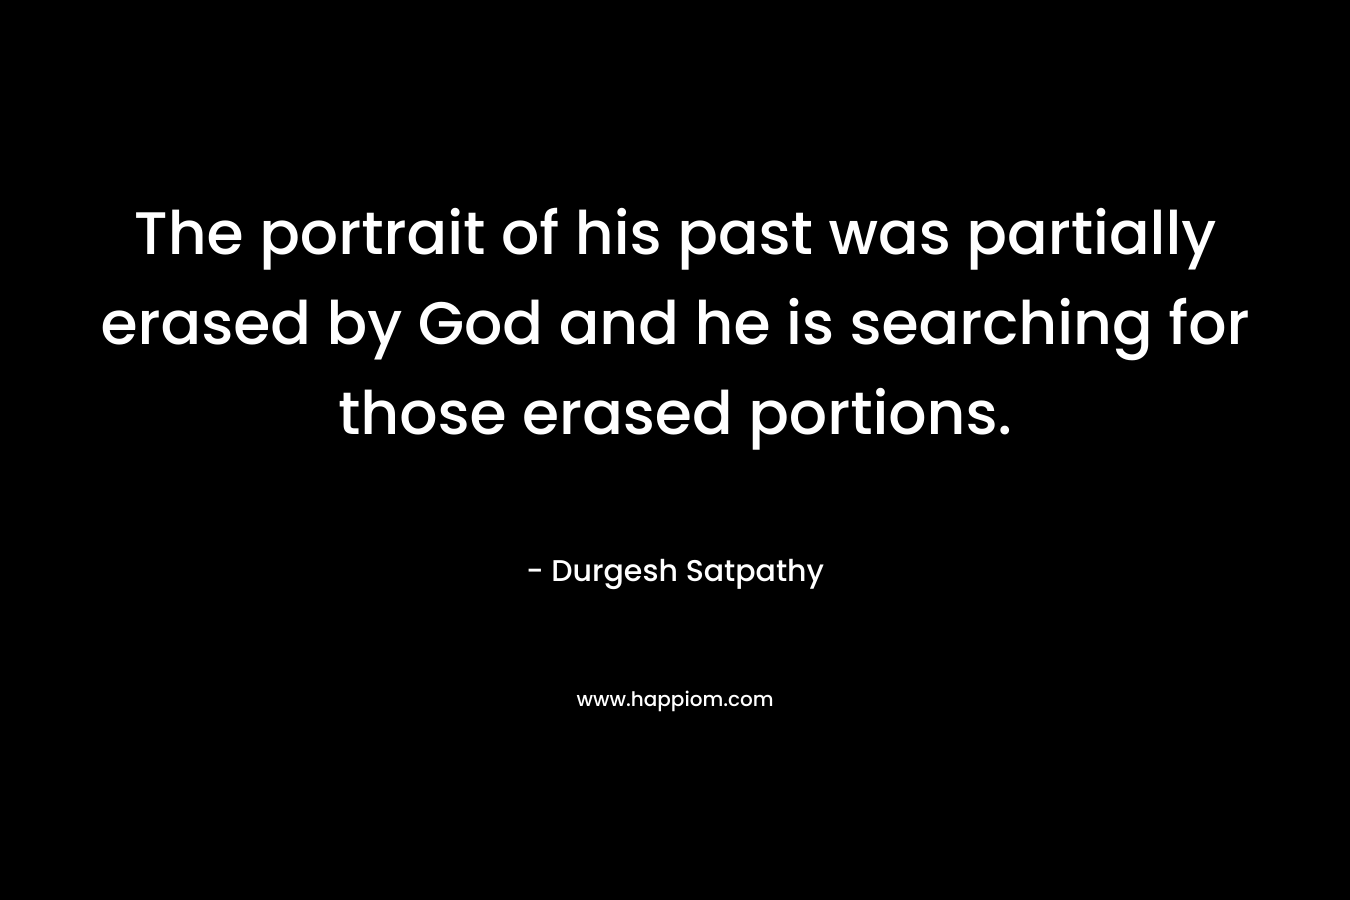 The portrait of his past was partially erased by God and he is searching for those erased portions. – Durgesh Satpathy